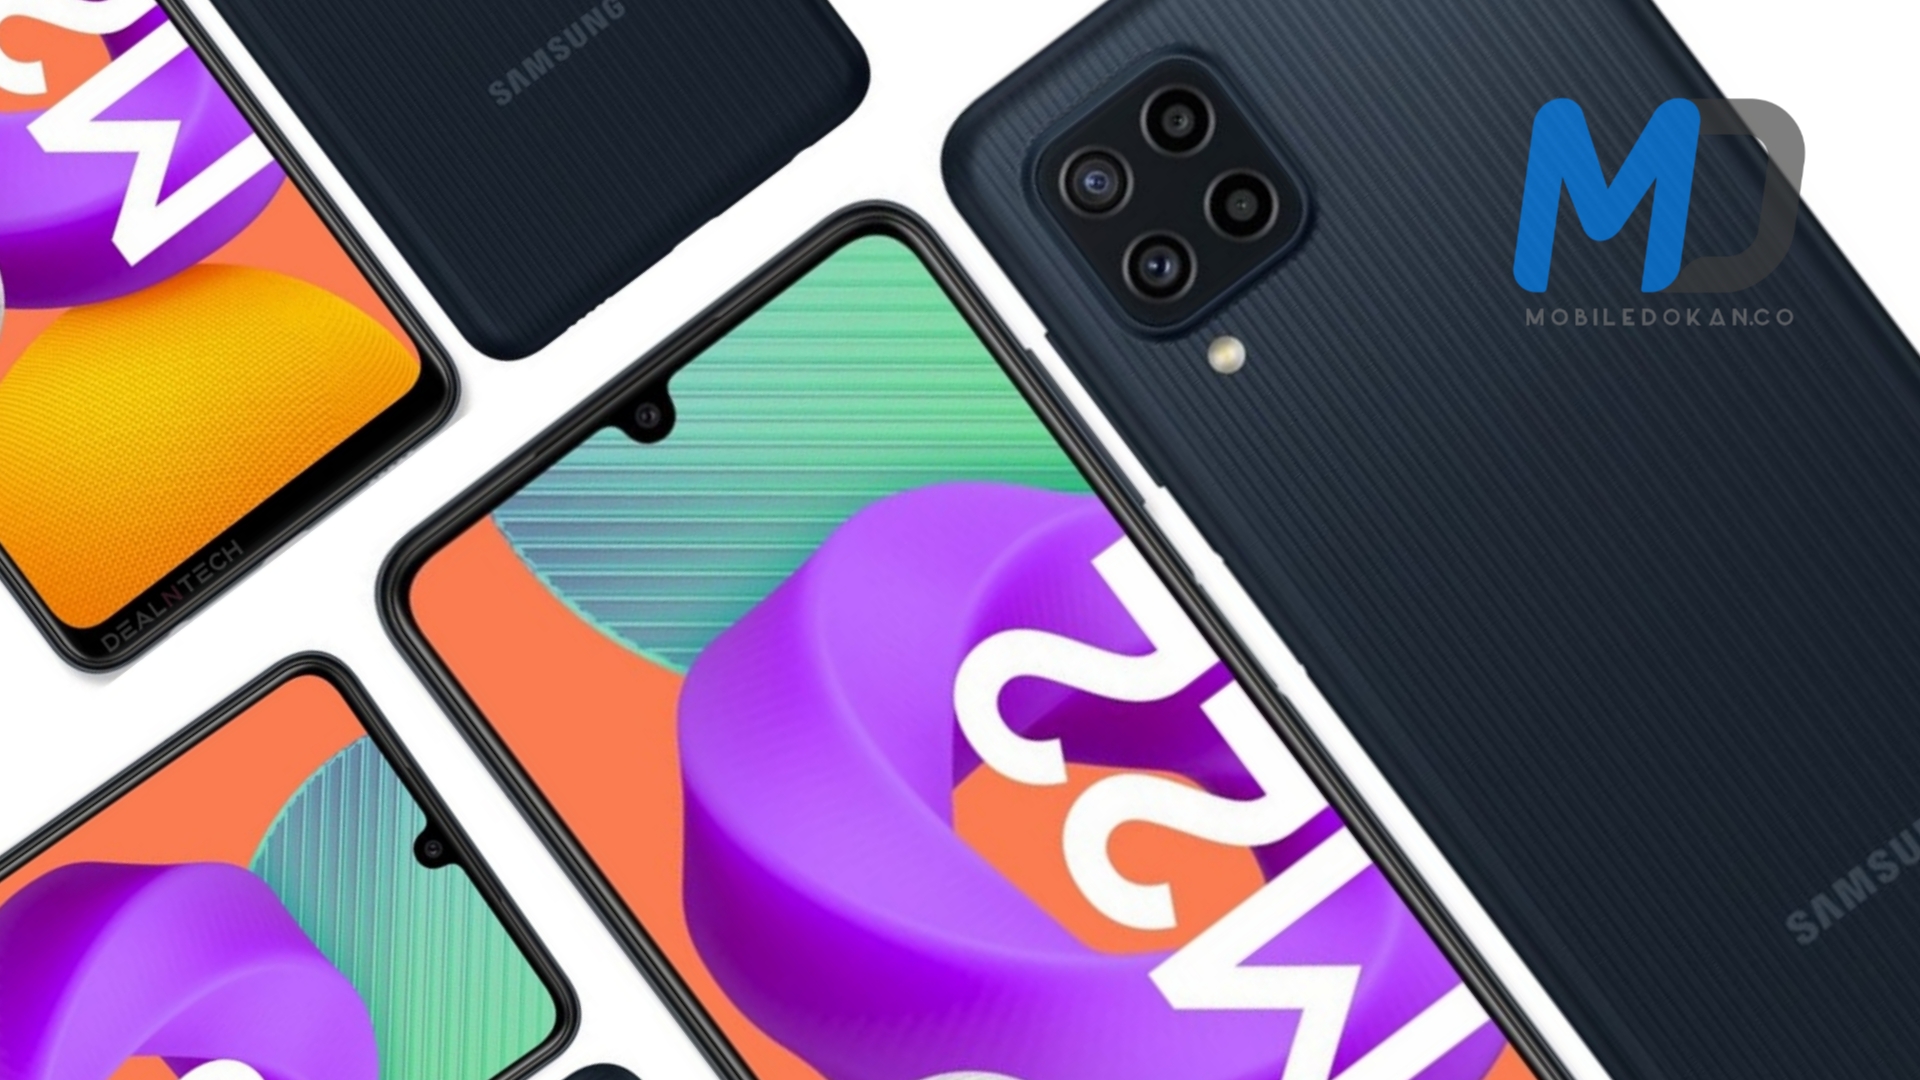 Samsung Galaxy M22 Support Page goes live